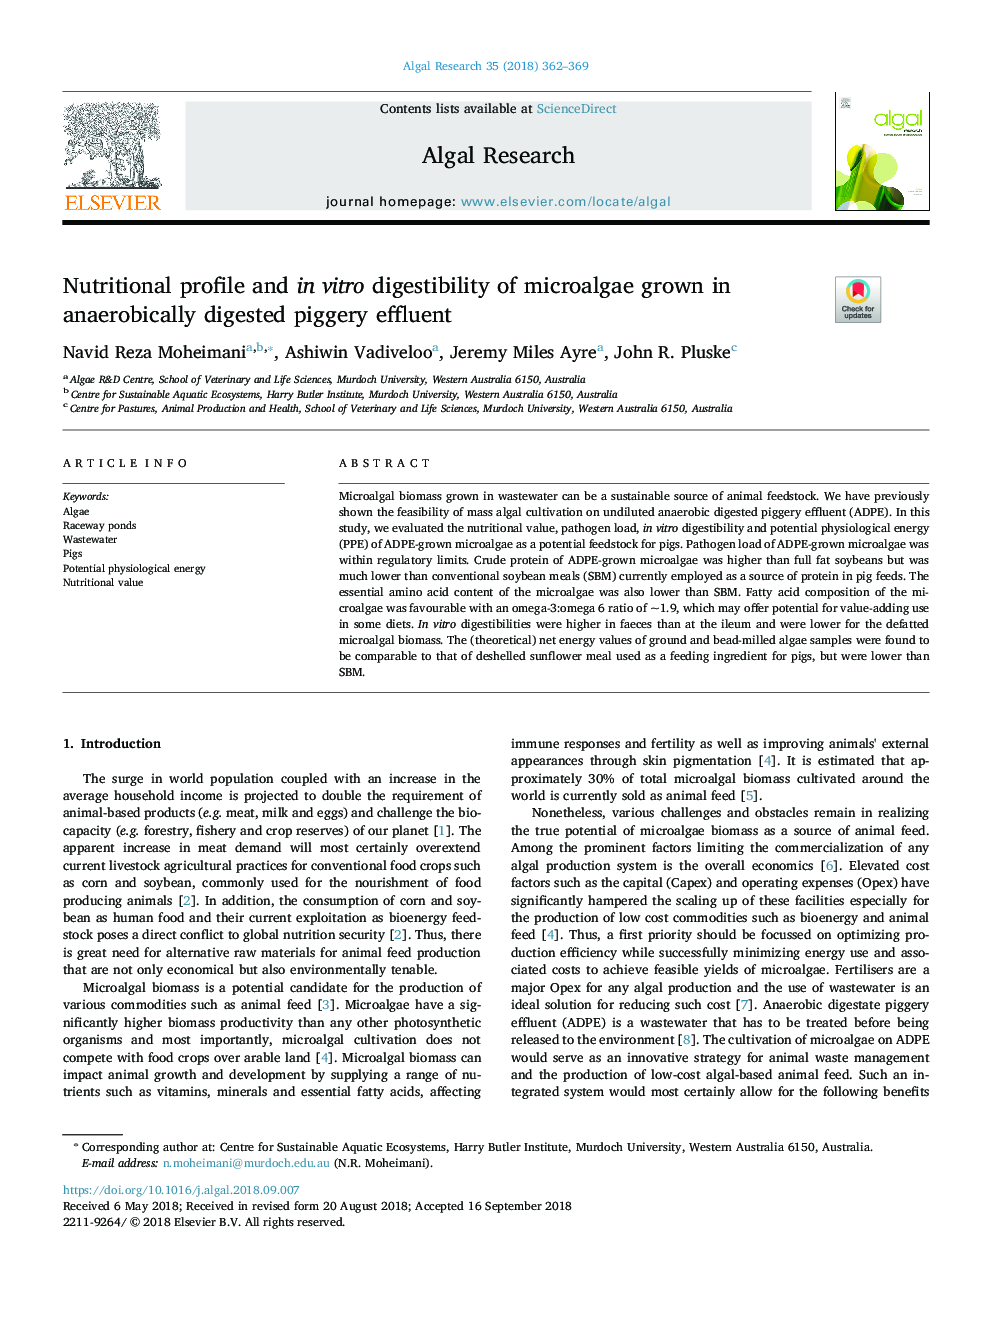 Nutritional profile and in vitro digestibility of microalgae grown in anaerobically digested piggery effluent